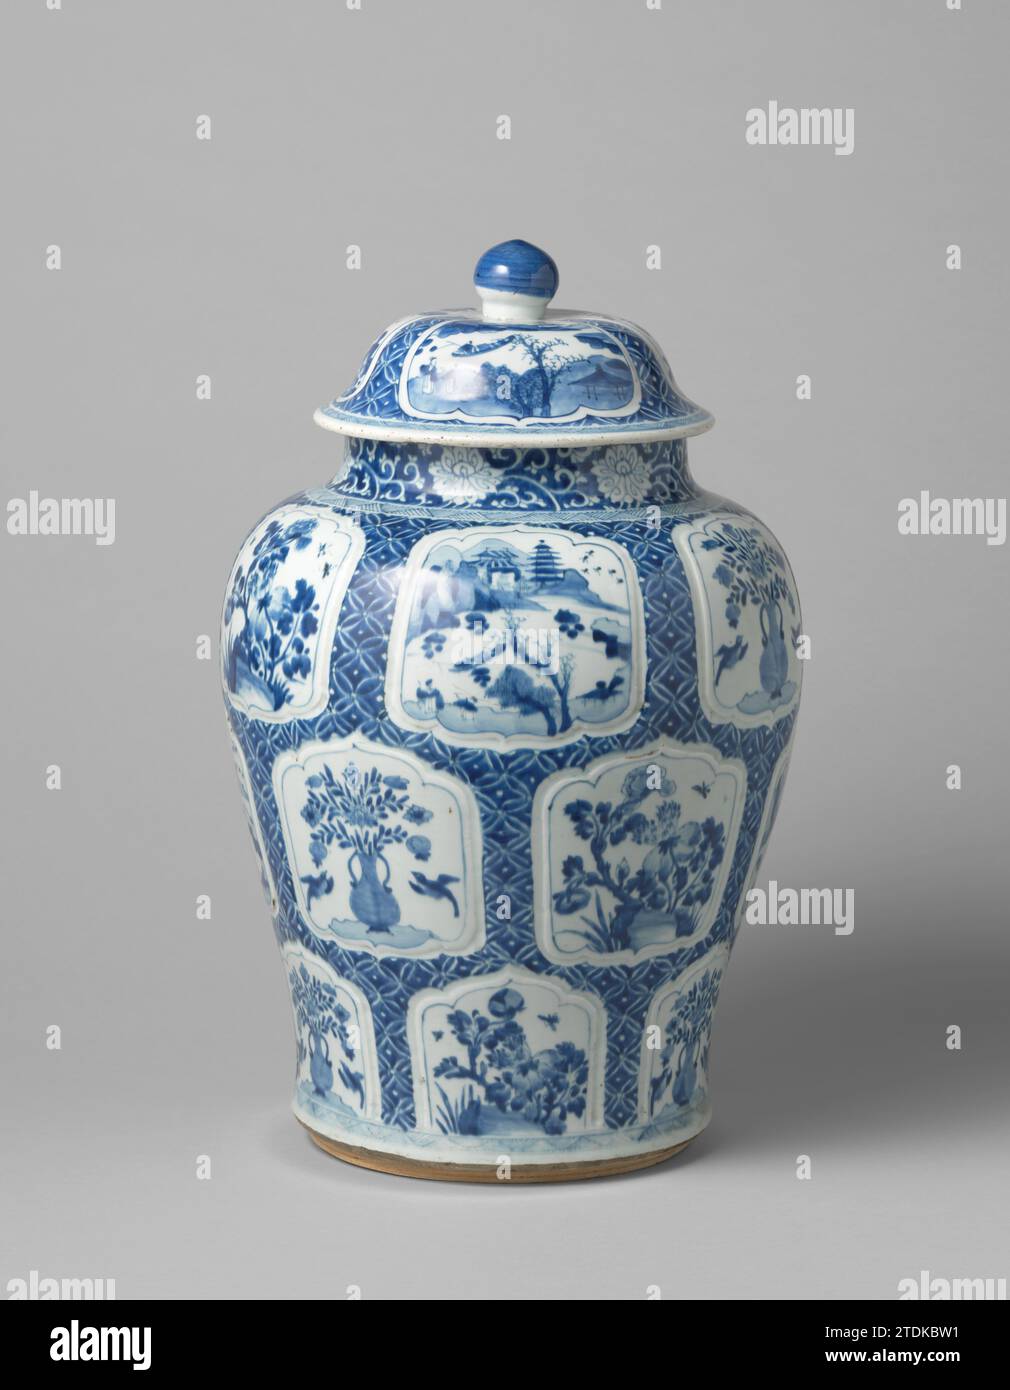 Baluster covered jar with flower vases, flowering plants and landscapes in panels, anonymous, c. 1680 - c. 1720 Balus -shaped porcelain lid jar, painted in underlaze blue. The belly is covered with servetwork with modeled modeled, scalloped cartouches with a flower vase (lotus) with two birds, flowering plants (peony) in a rock or a river landscap with two person, a boat, pavilions, trees and mountains. The neck with stylized lotus drinks. On the shoulder and around the foot a bond with archery. Blue White. China porcelain. glaze. cobalt (mineral) painting / vitrification Balus -shaped porcela Stock Photo